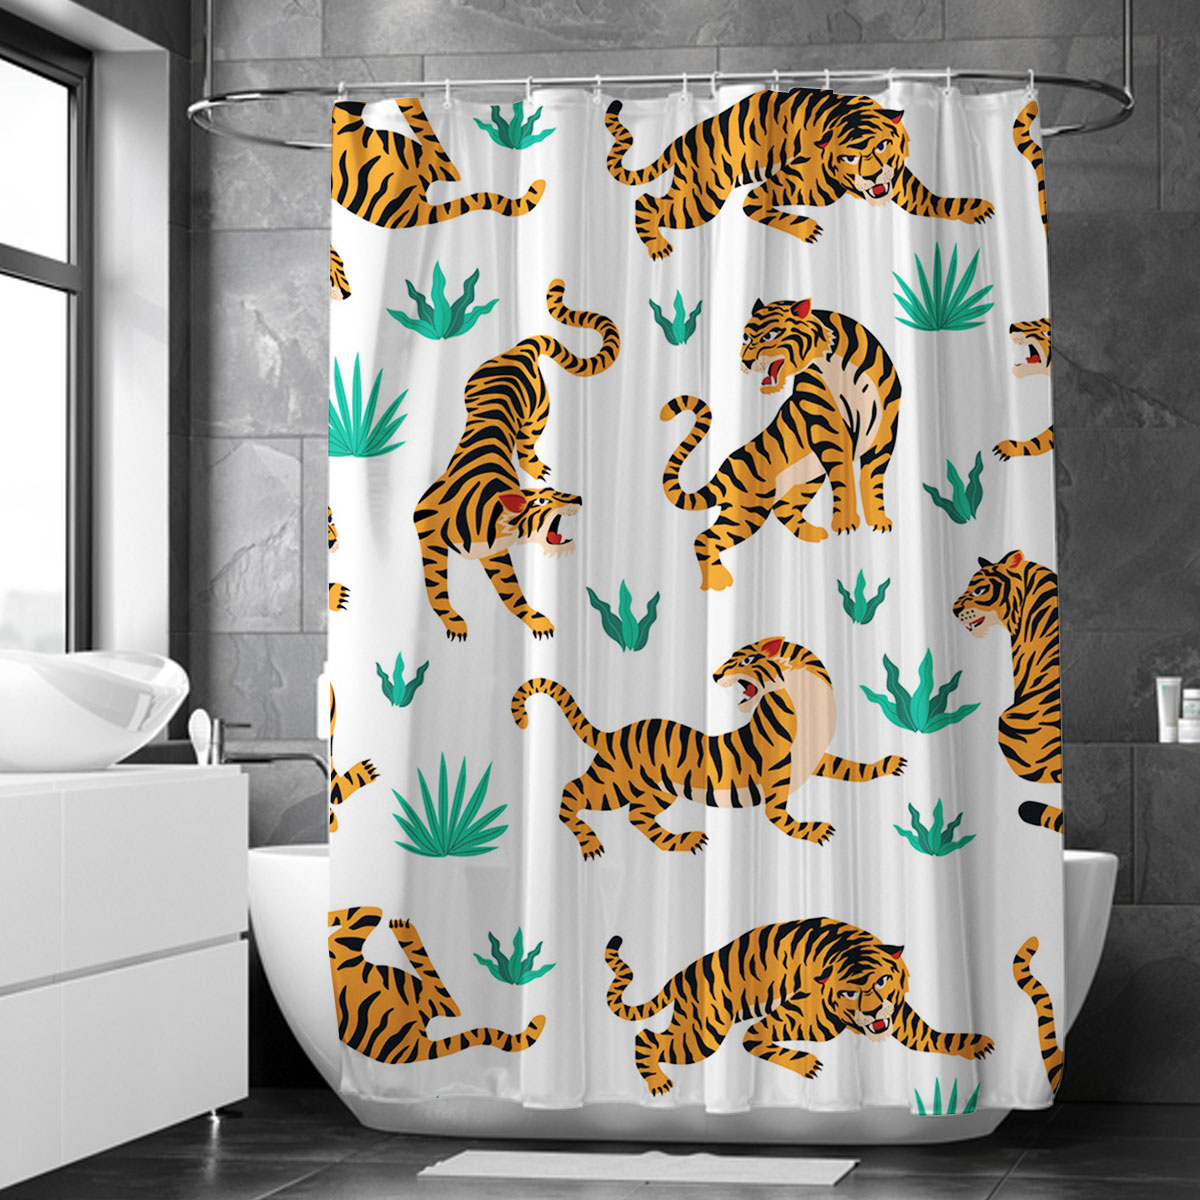 Tiger And Grass Shower Curtain 6